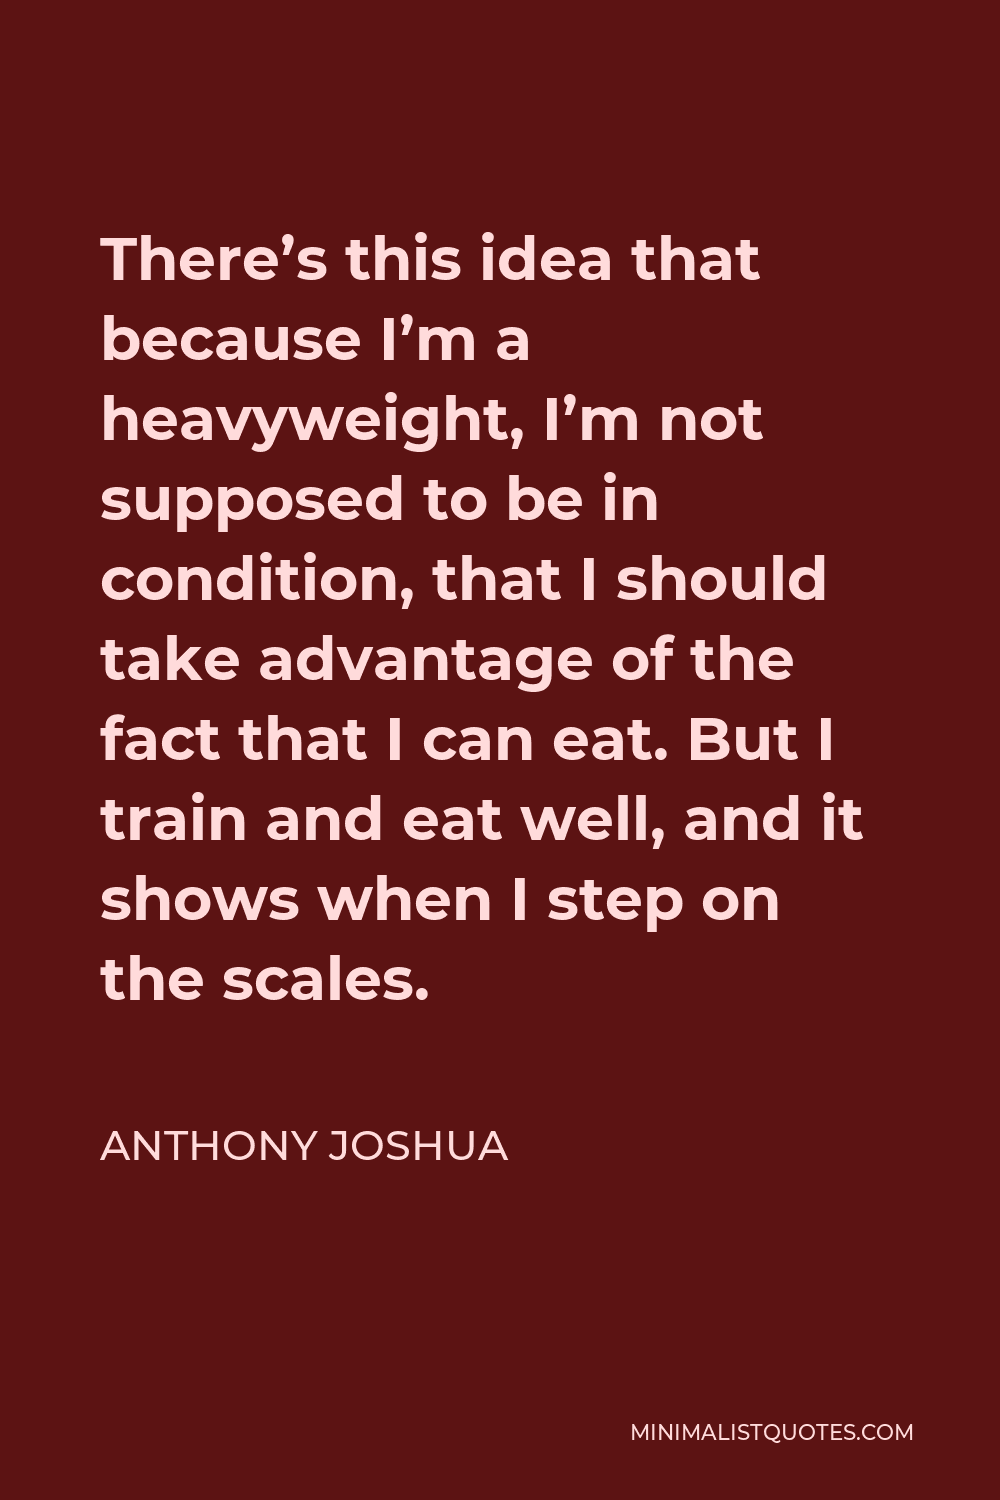 Anthony Joshua Quote - There’s this idea that because I’m a heavyweight, I’m not supposed to be in condition, that I should take advantage of the fact that I can eat. But I train and eat well, and it shows when I step on the scales.